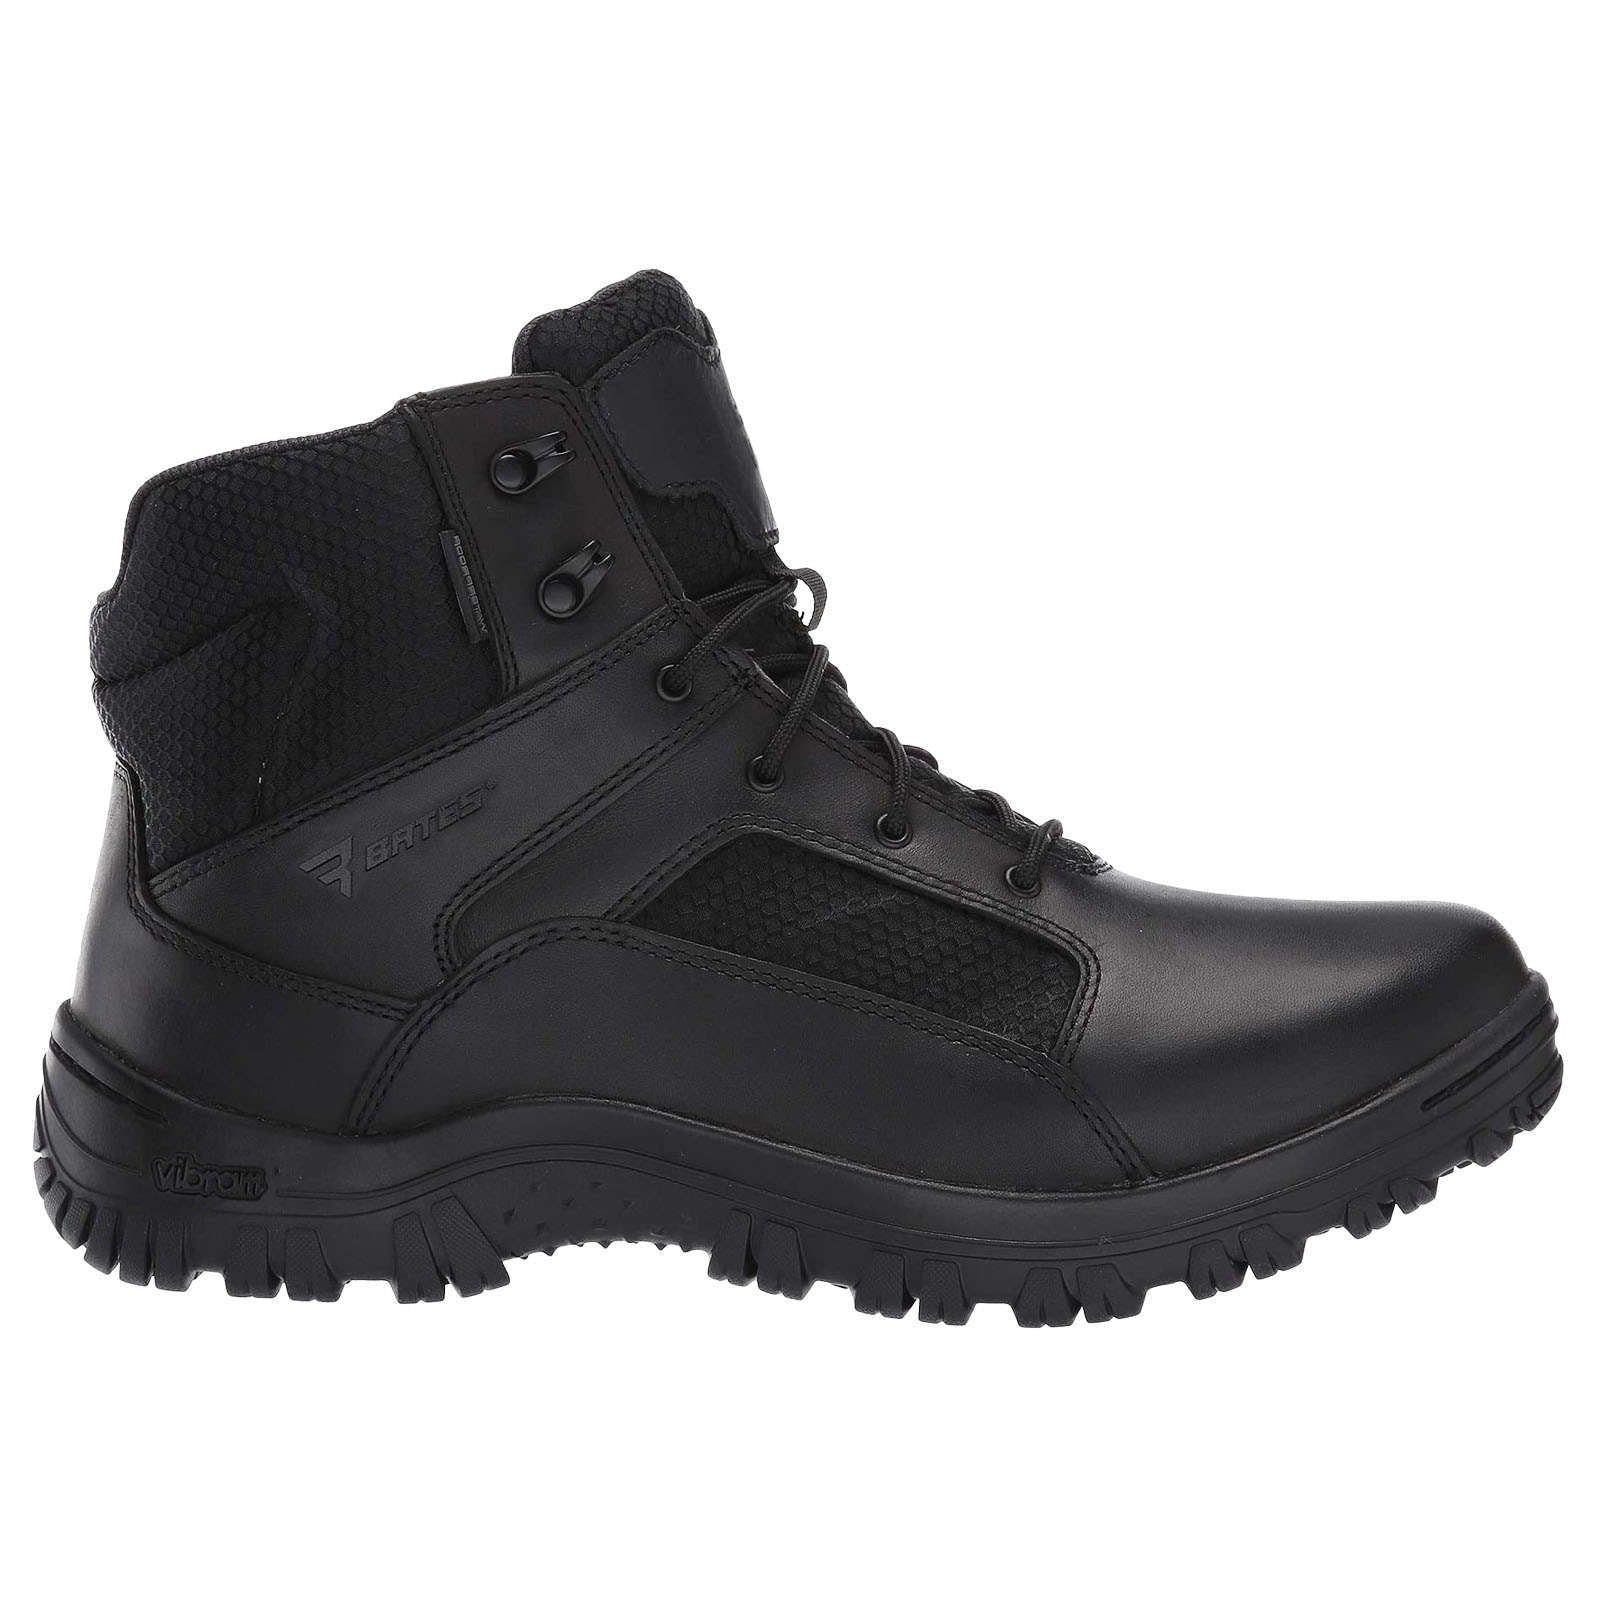 Bates Manuever Waterproof Mid-High Waterproof Leather Synthetic Men's Tactical Boots#color_black